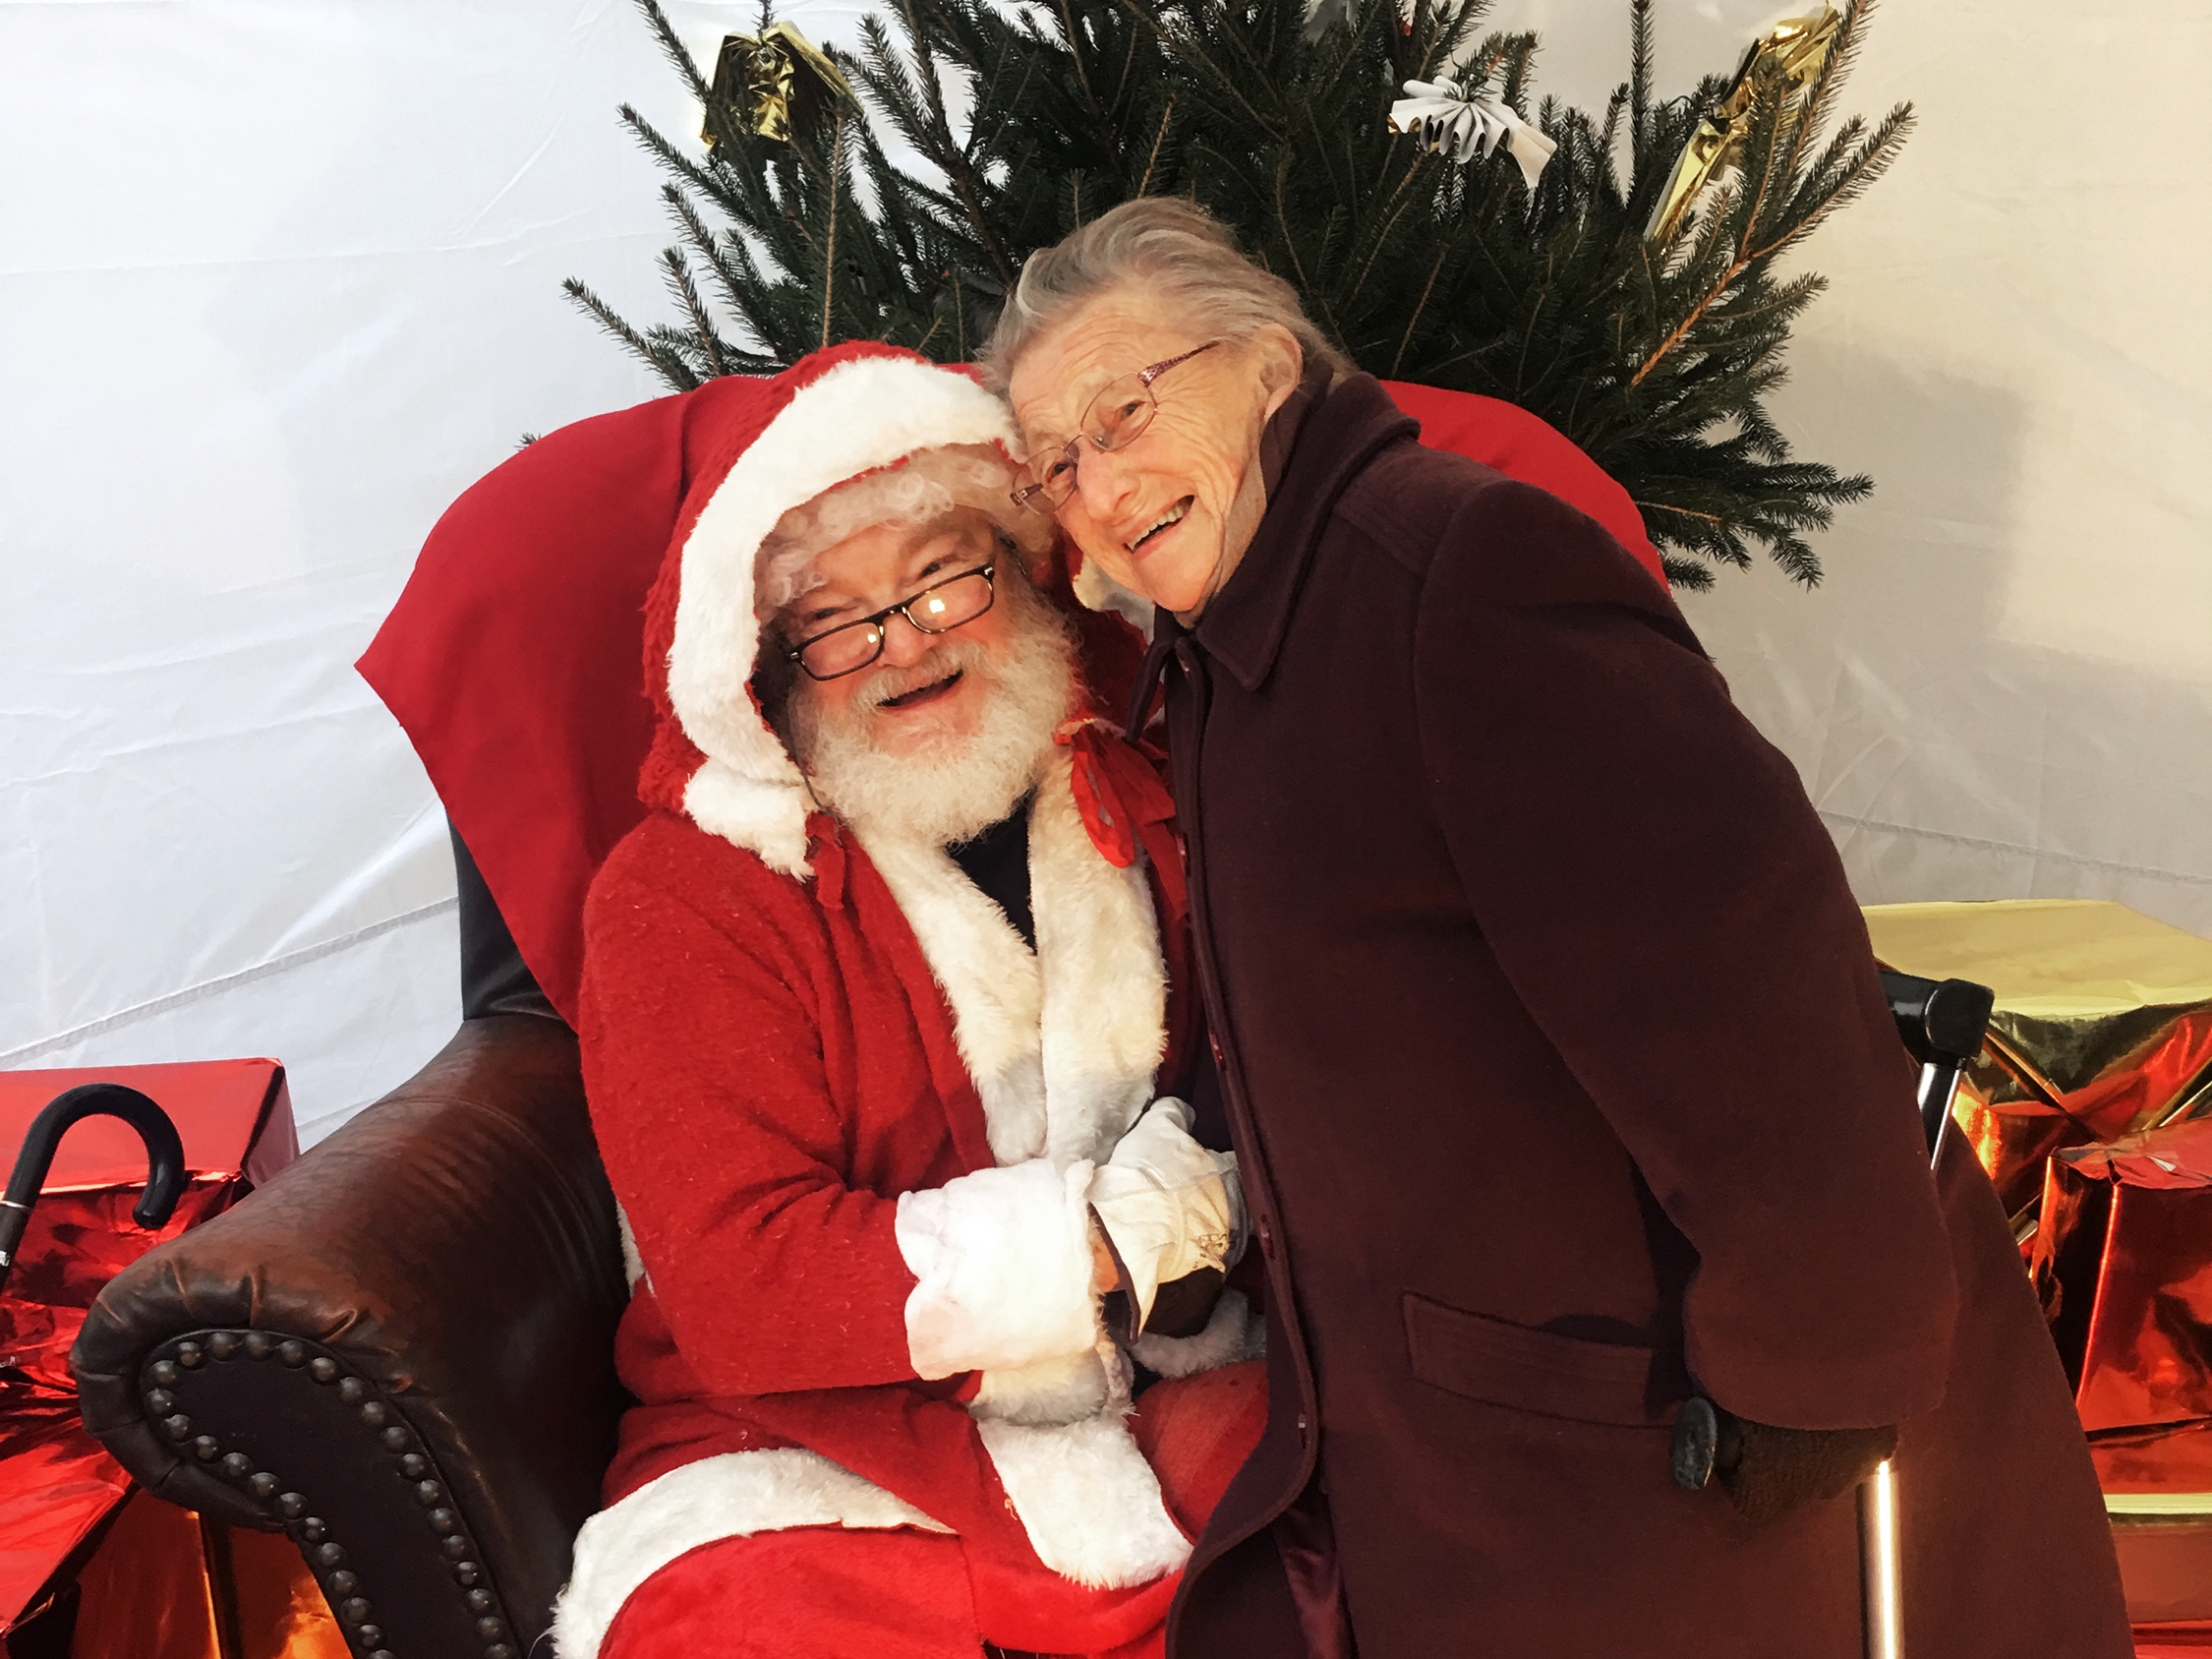 Haley and Andree Boursier, 88, pose for photos. She says she still believes in Pere Noel. (Photo by Eleanor Beardsley/NPR)